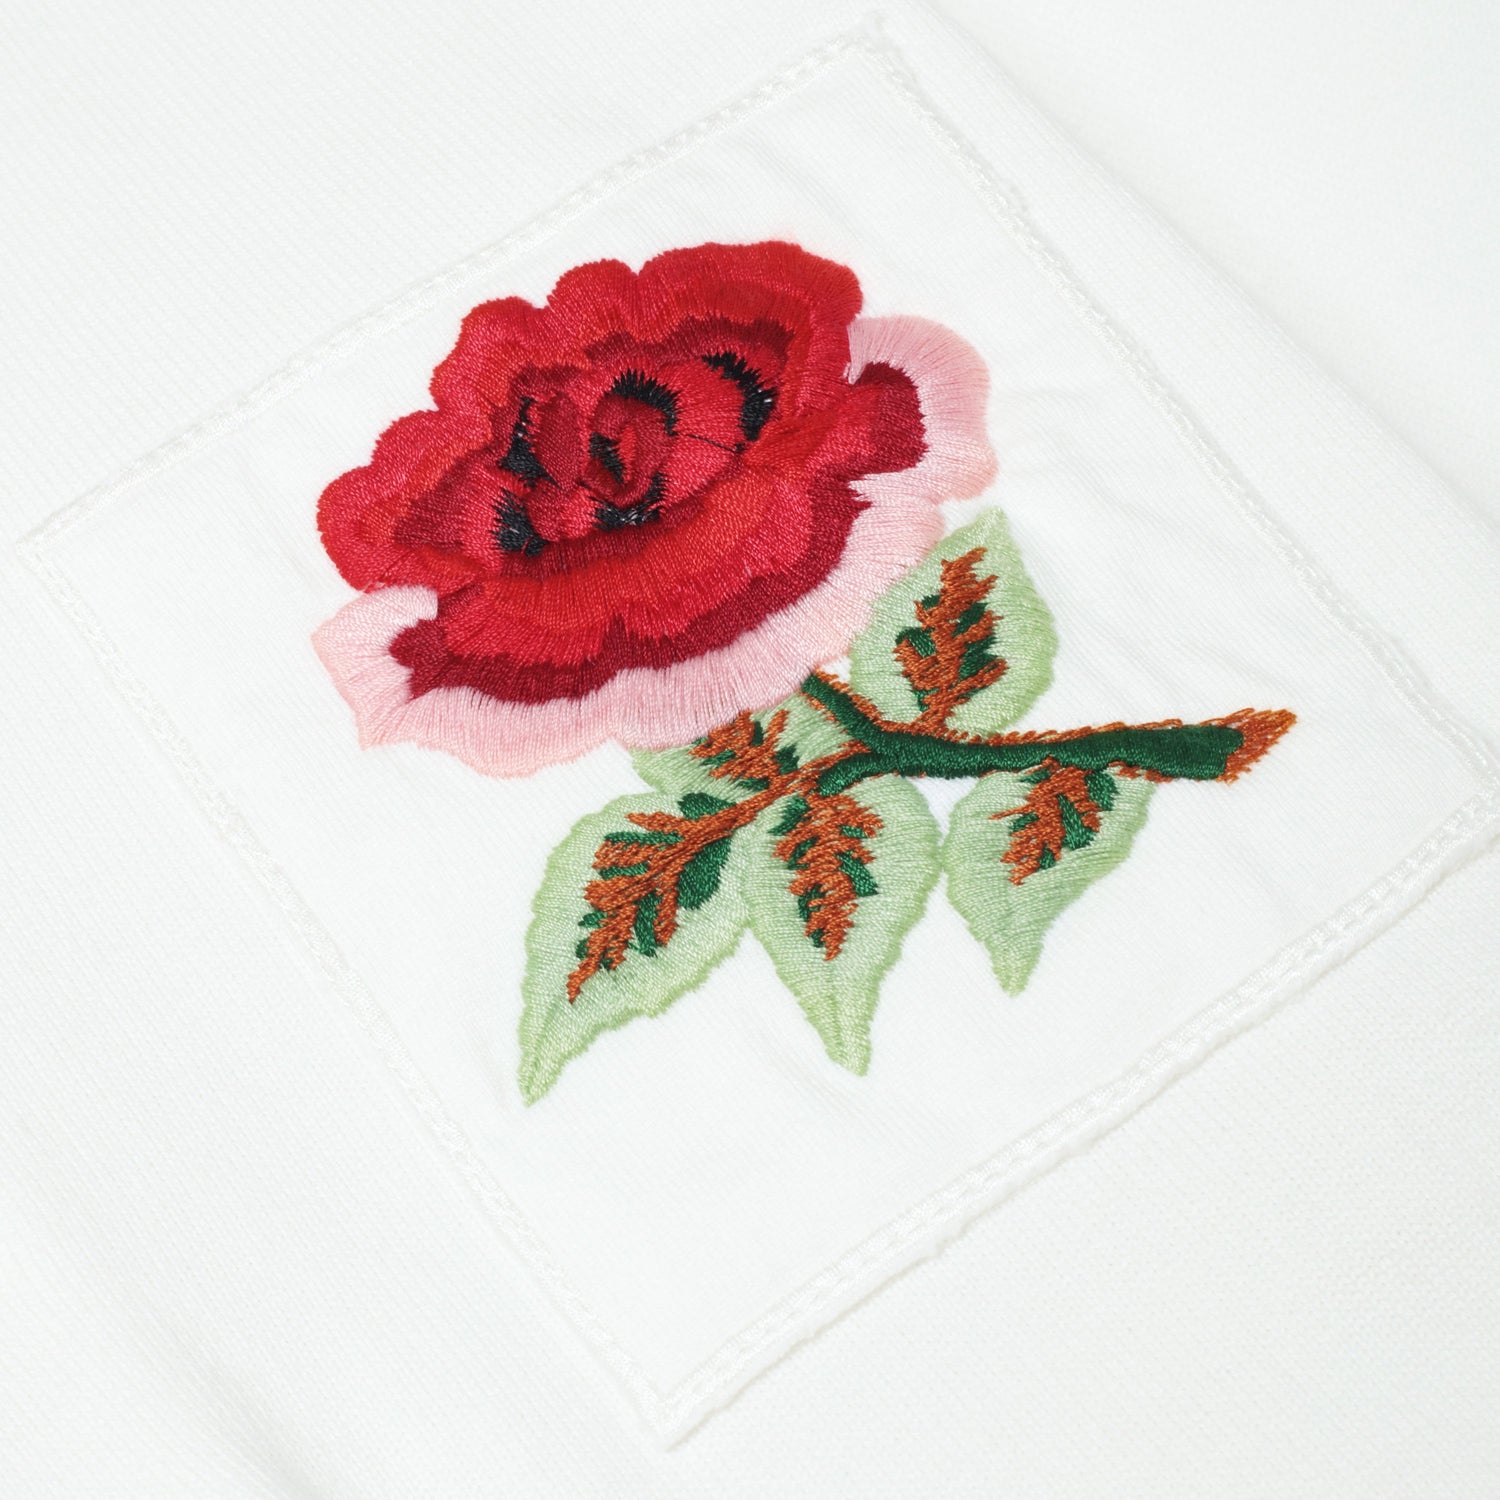 Embroidered rose patch.